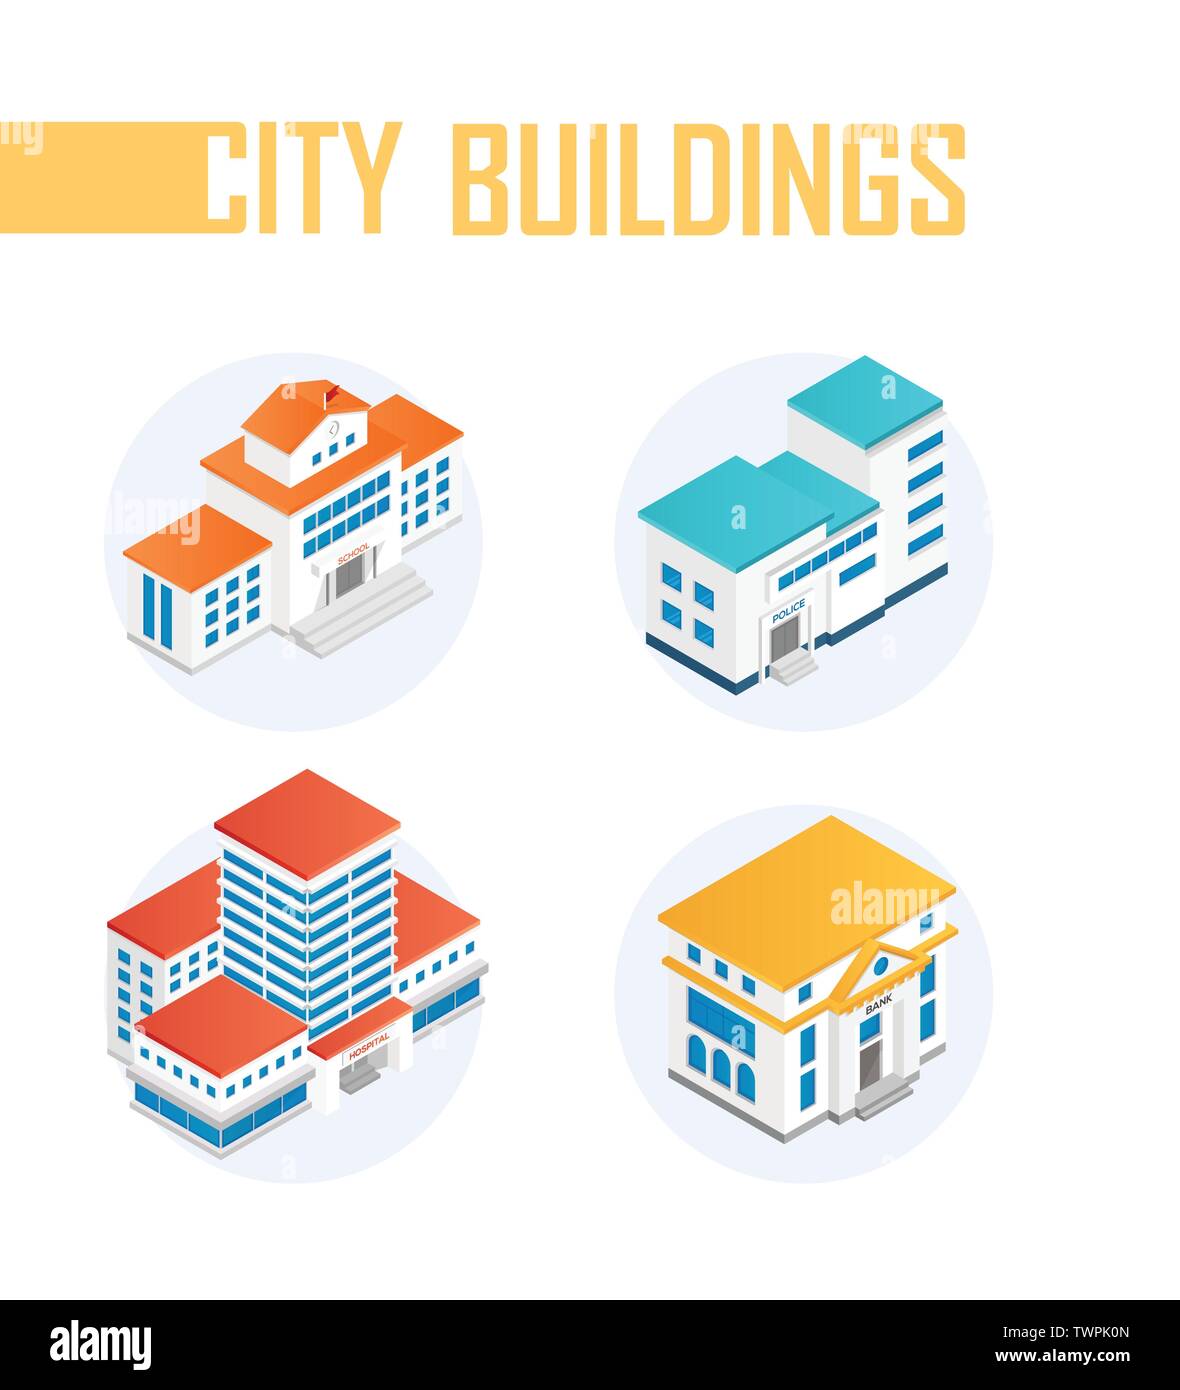 Public city buildings - modern vector colorful isometric elements Stock Vector